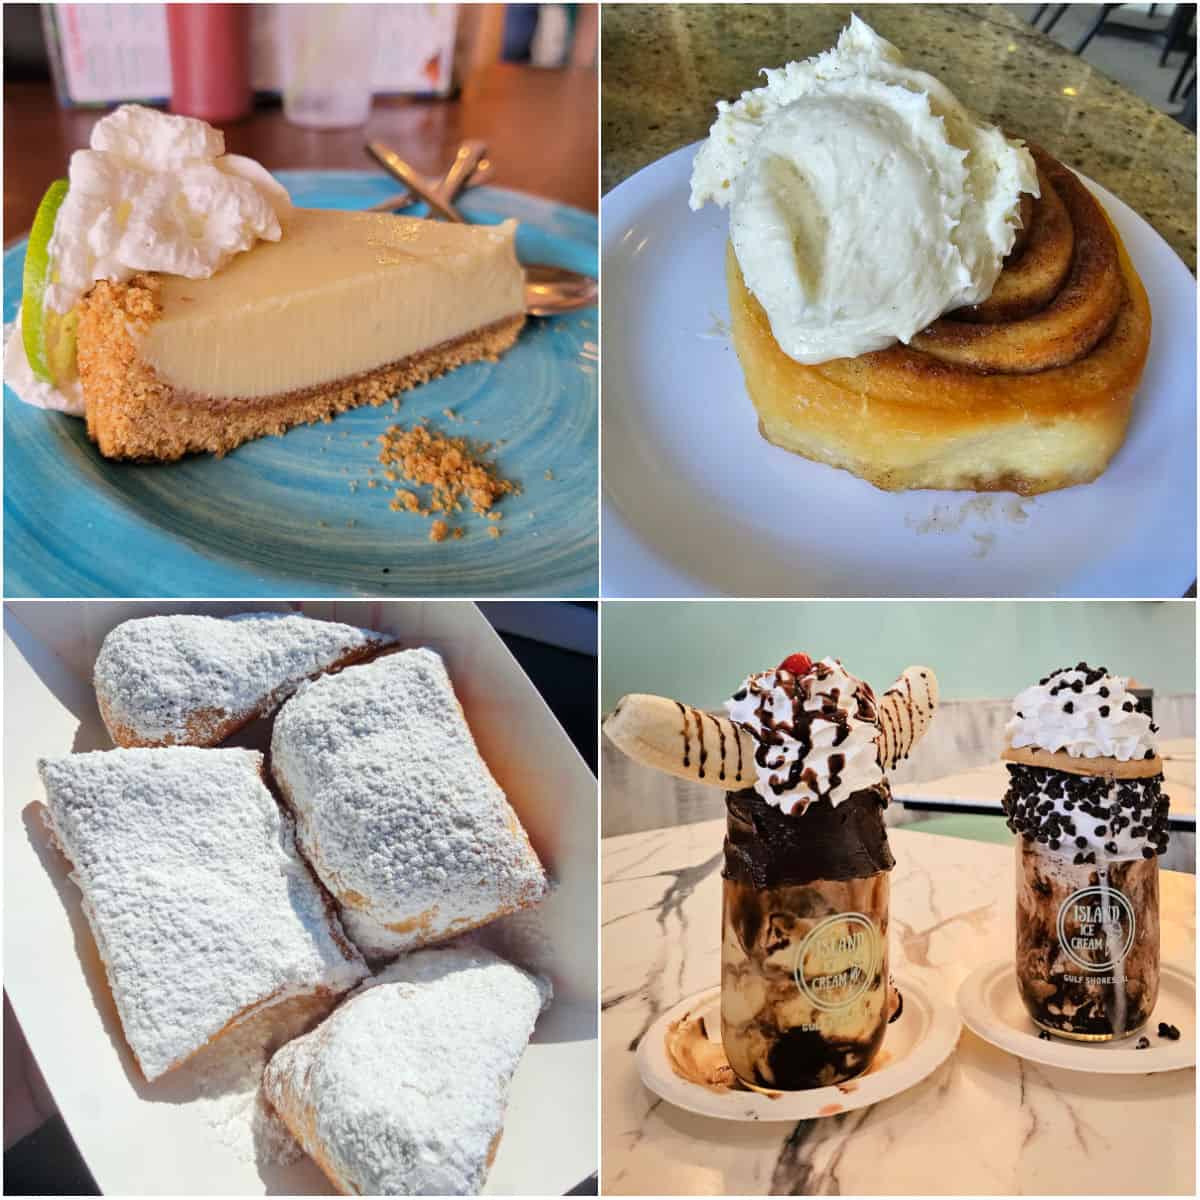 Collage of desserts found in Gulf Shores and Orange beach including key lime pie, cinnamon roll, beignets, and milkshakes